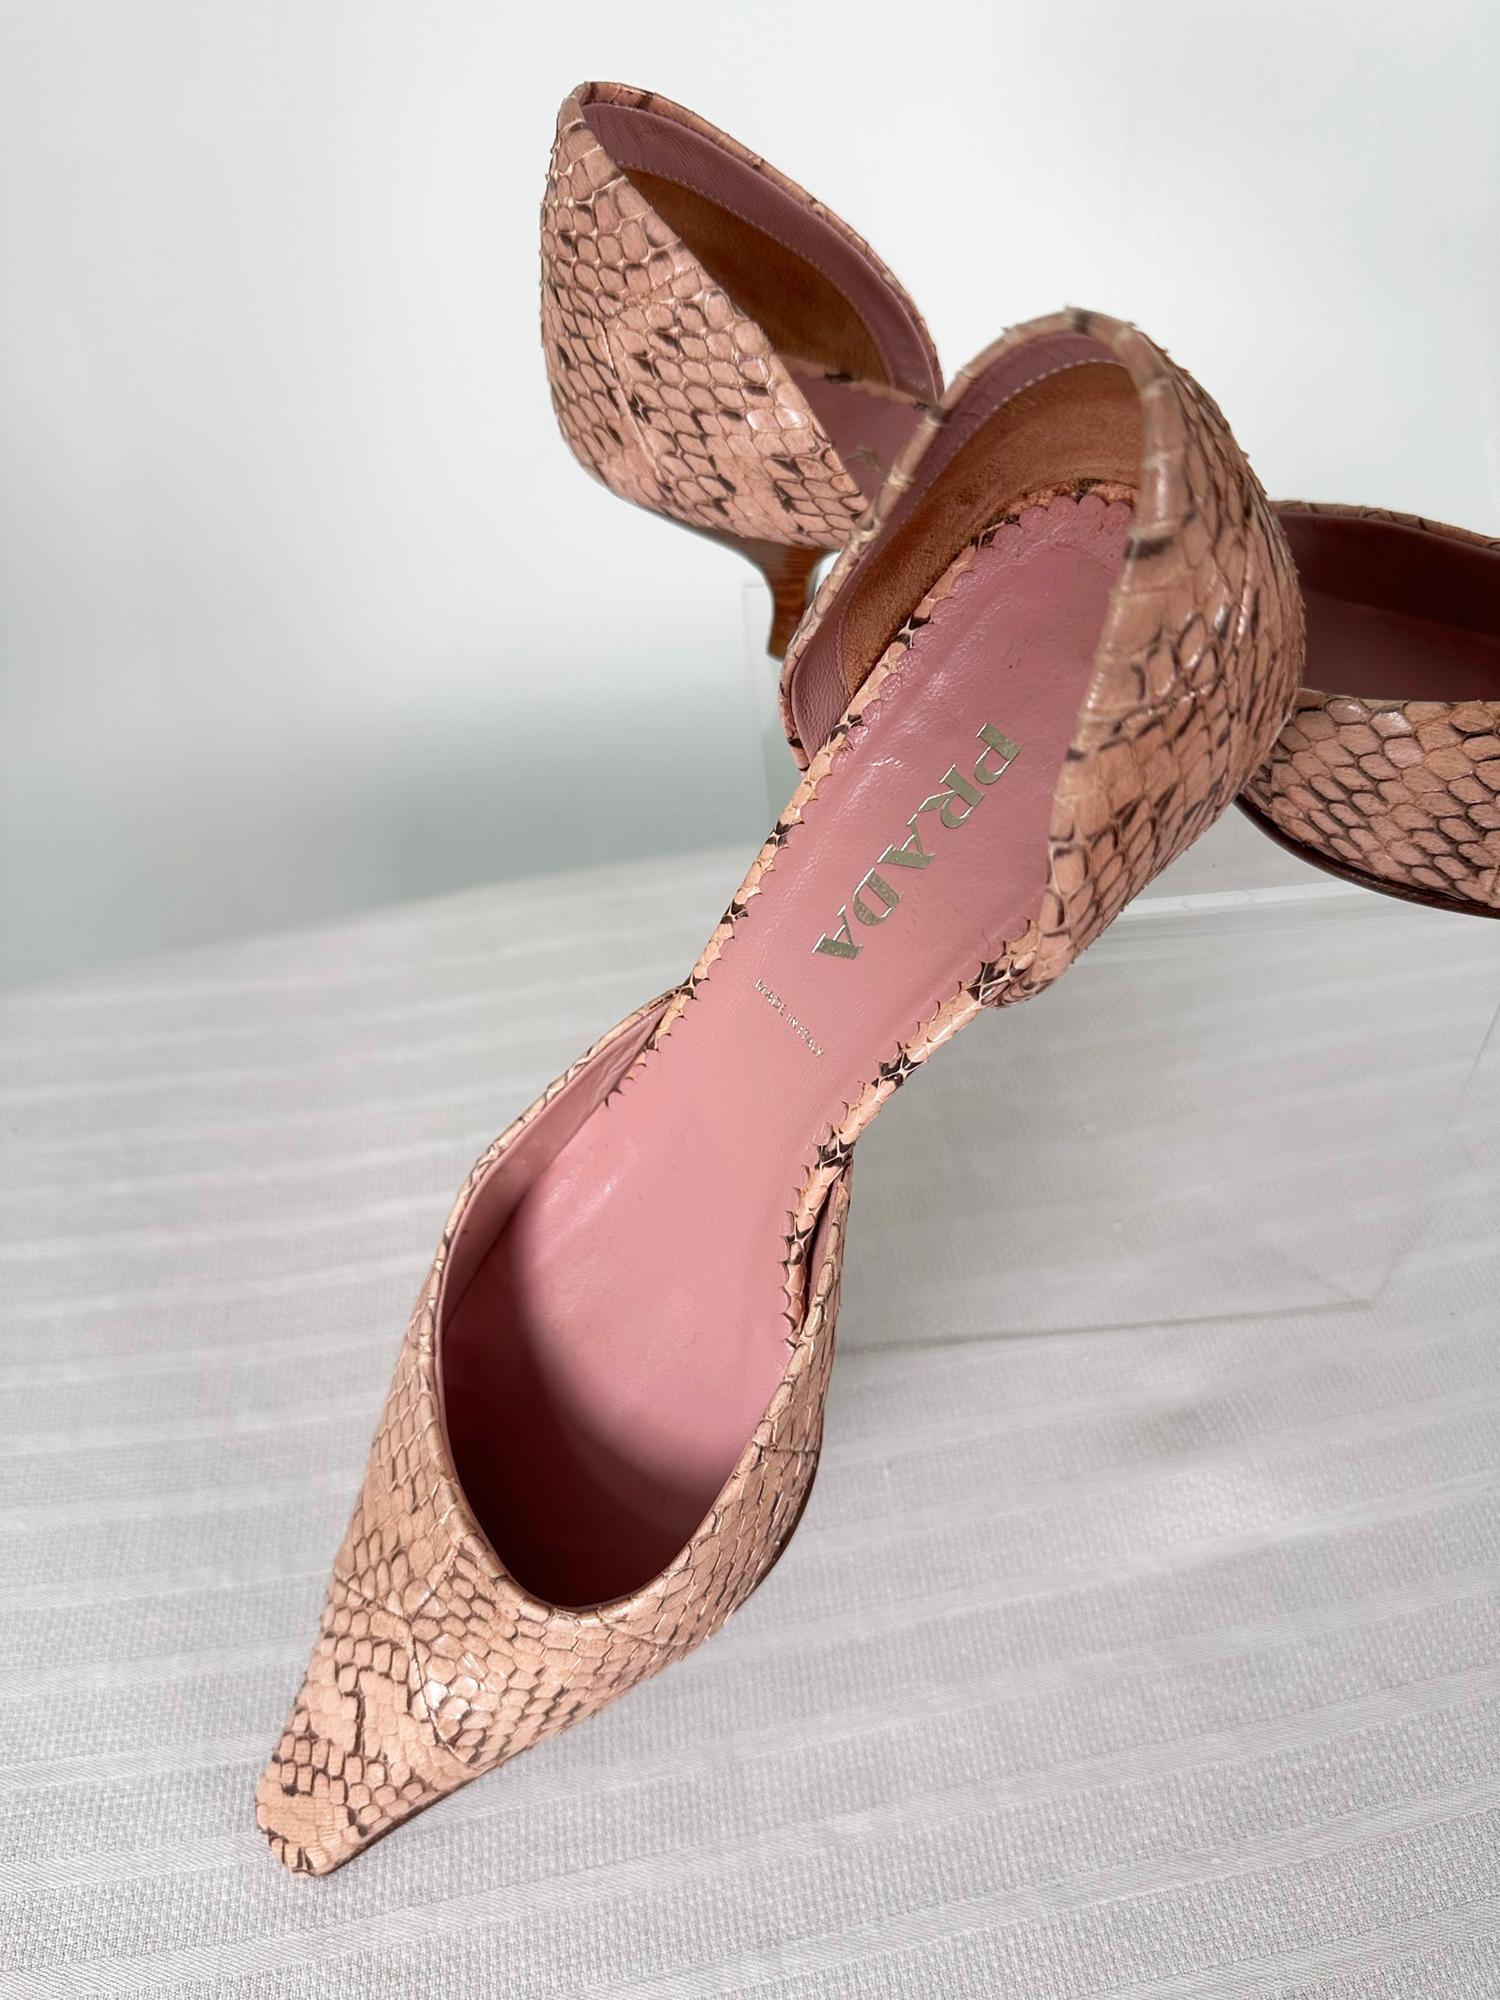 Prada pink snakeskin D'Orsay kitten heel pumps marked size 37 1/2. Pointed square toe pumps have stacked natural leather kitten heels. Leather soles and interior. Pre owned and well cared for, they are in very good condition, together with protector